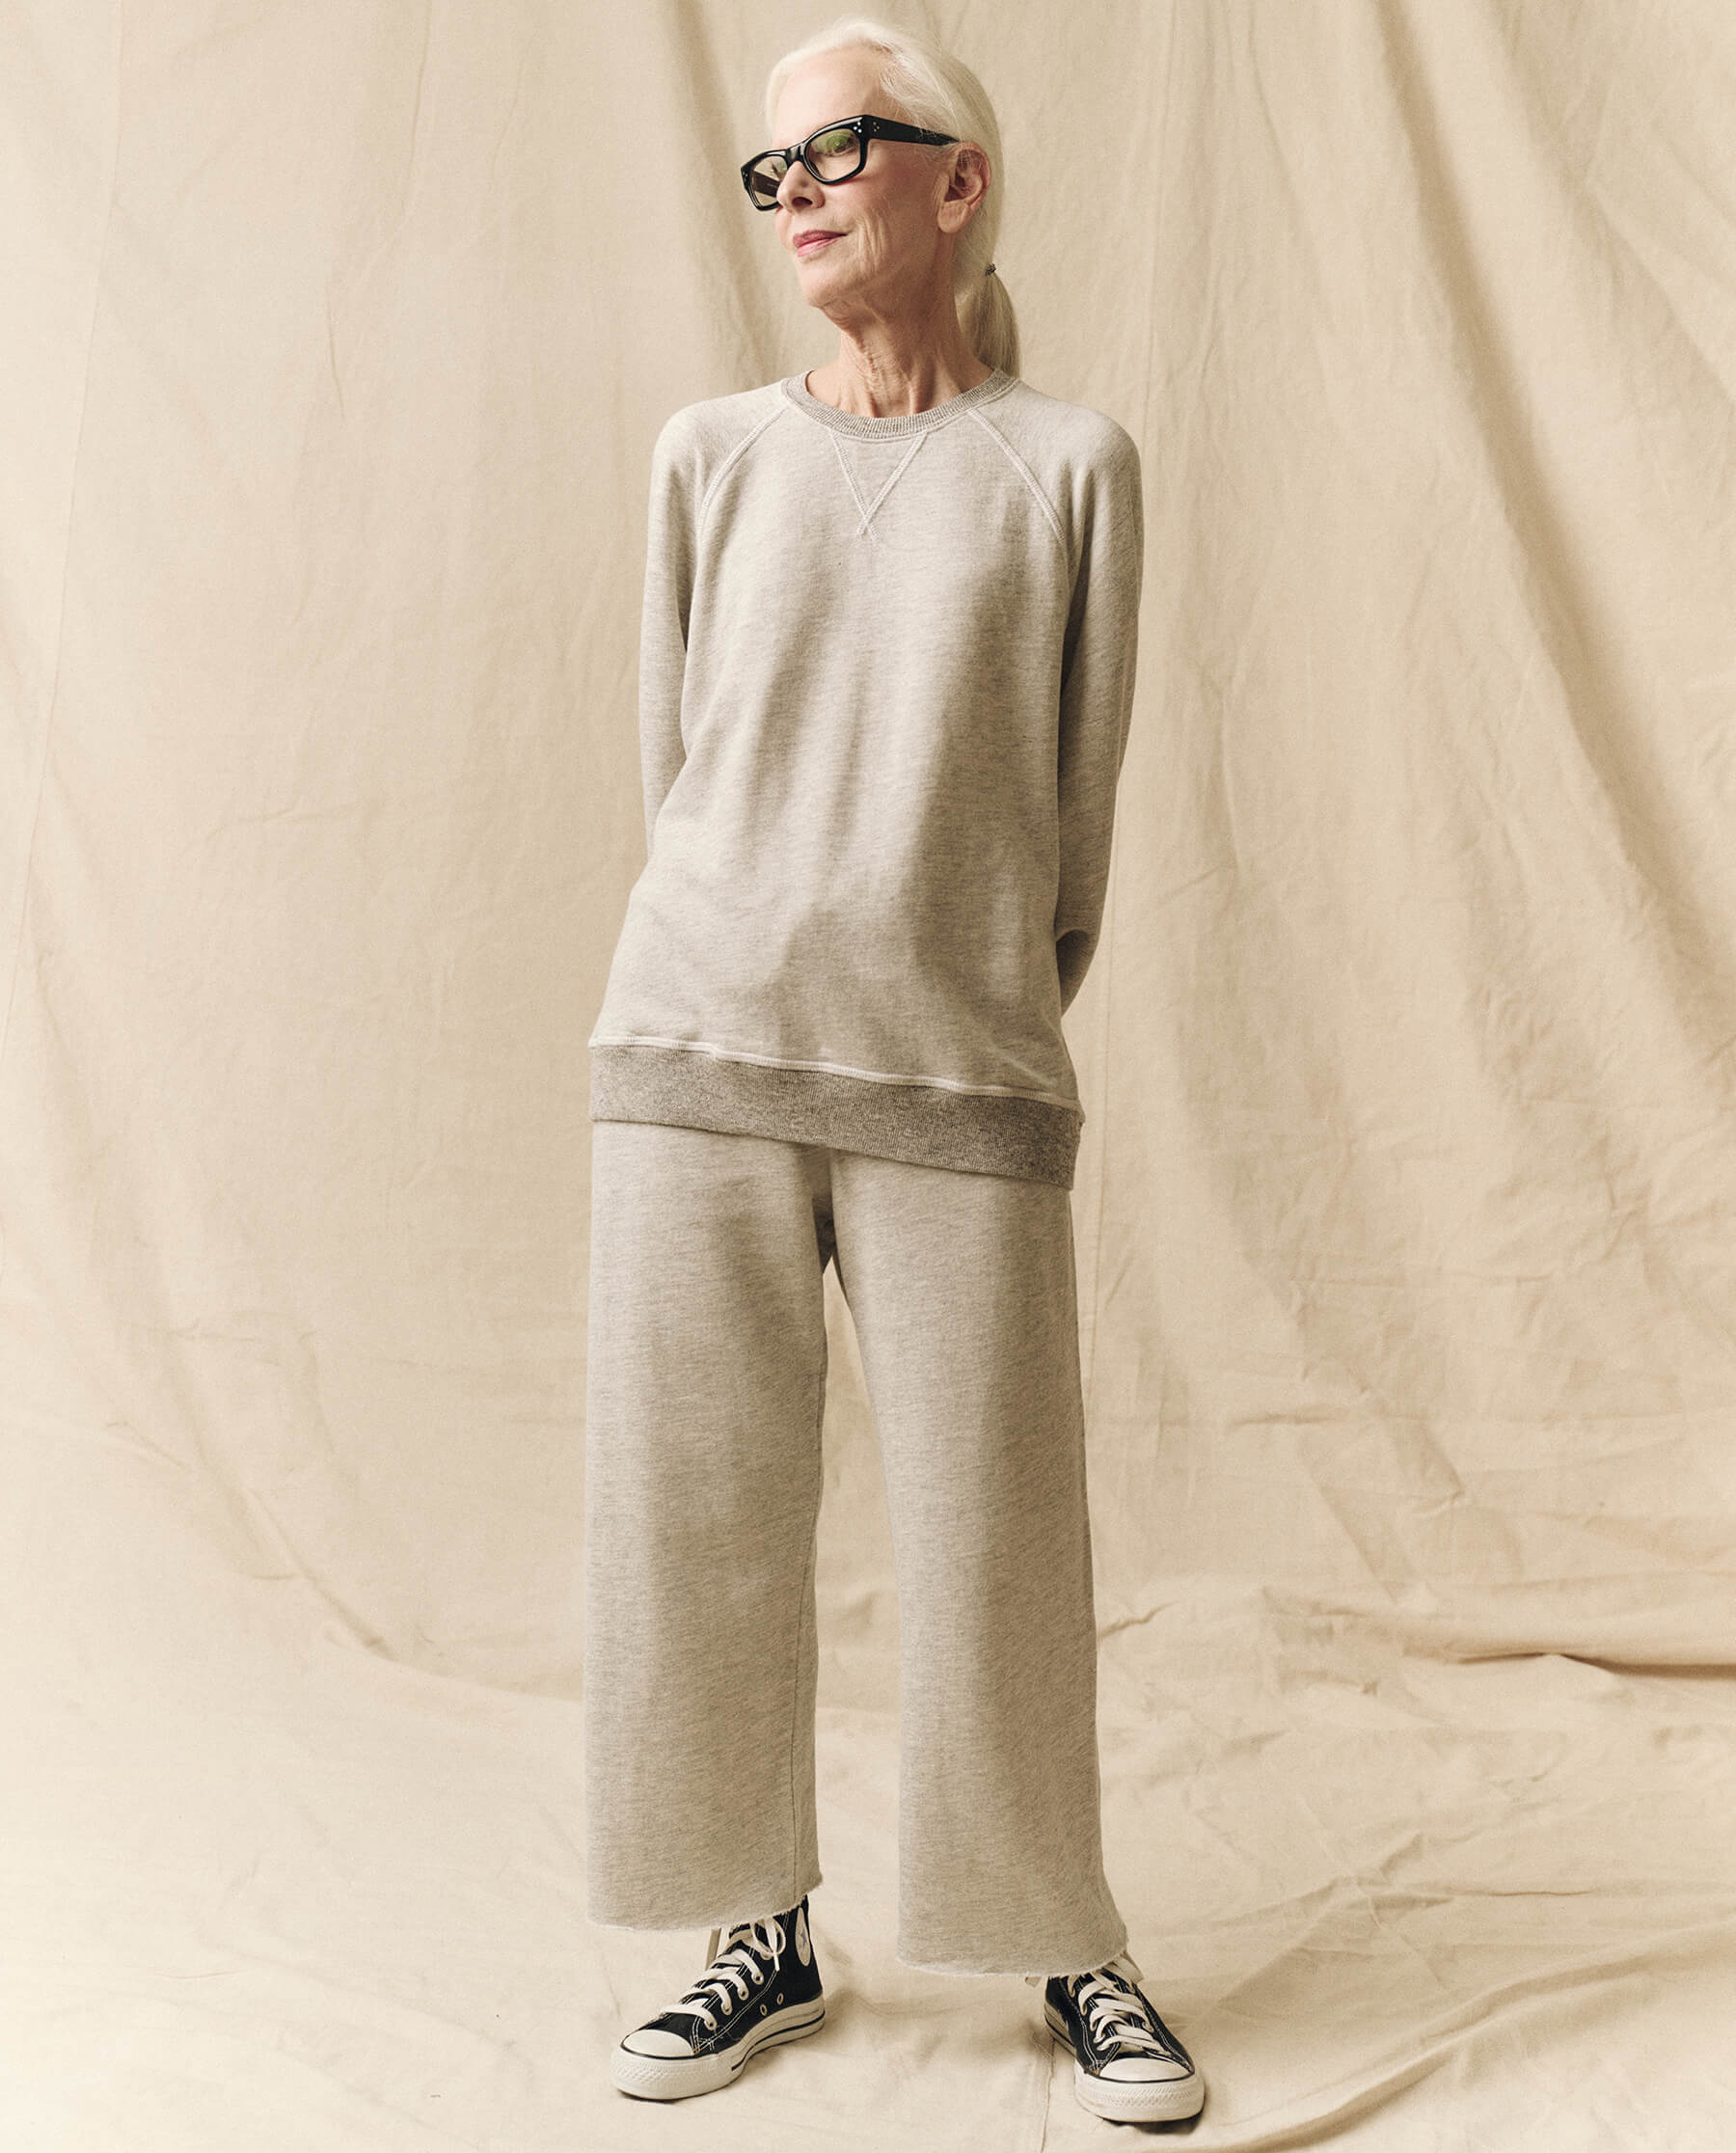 The Wide Leg Cropped Sweatpant. -- Soft Heather Grey SWEATPANTS THE GREAT. FALL 23 SOFT HEATHER GREY